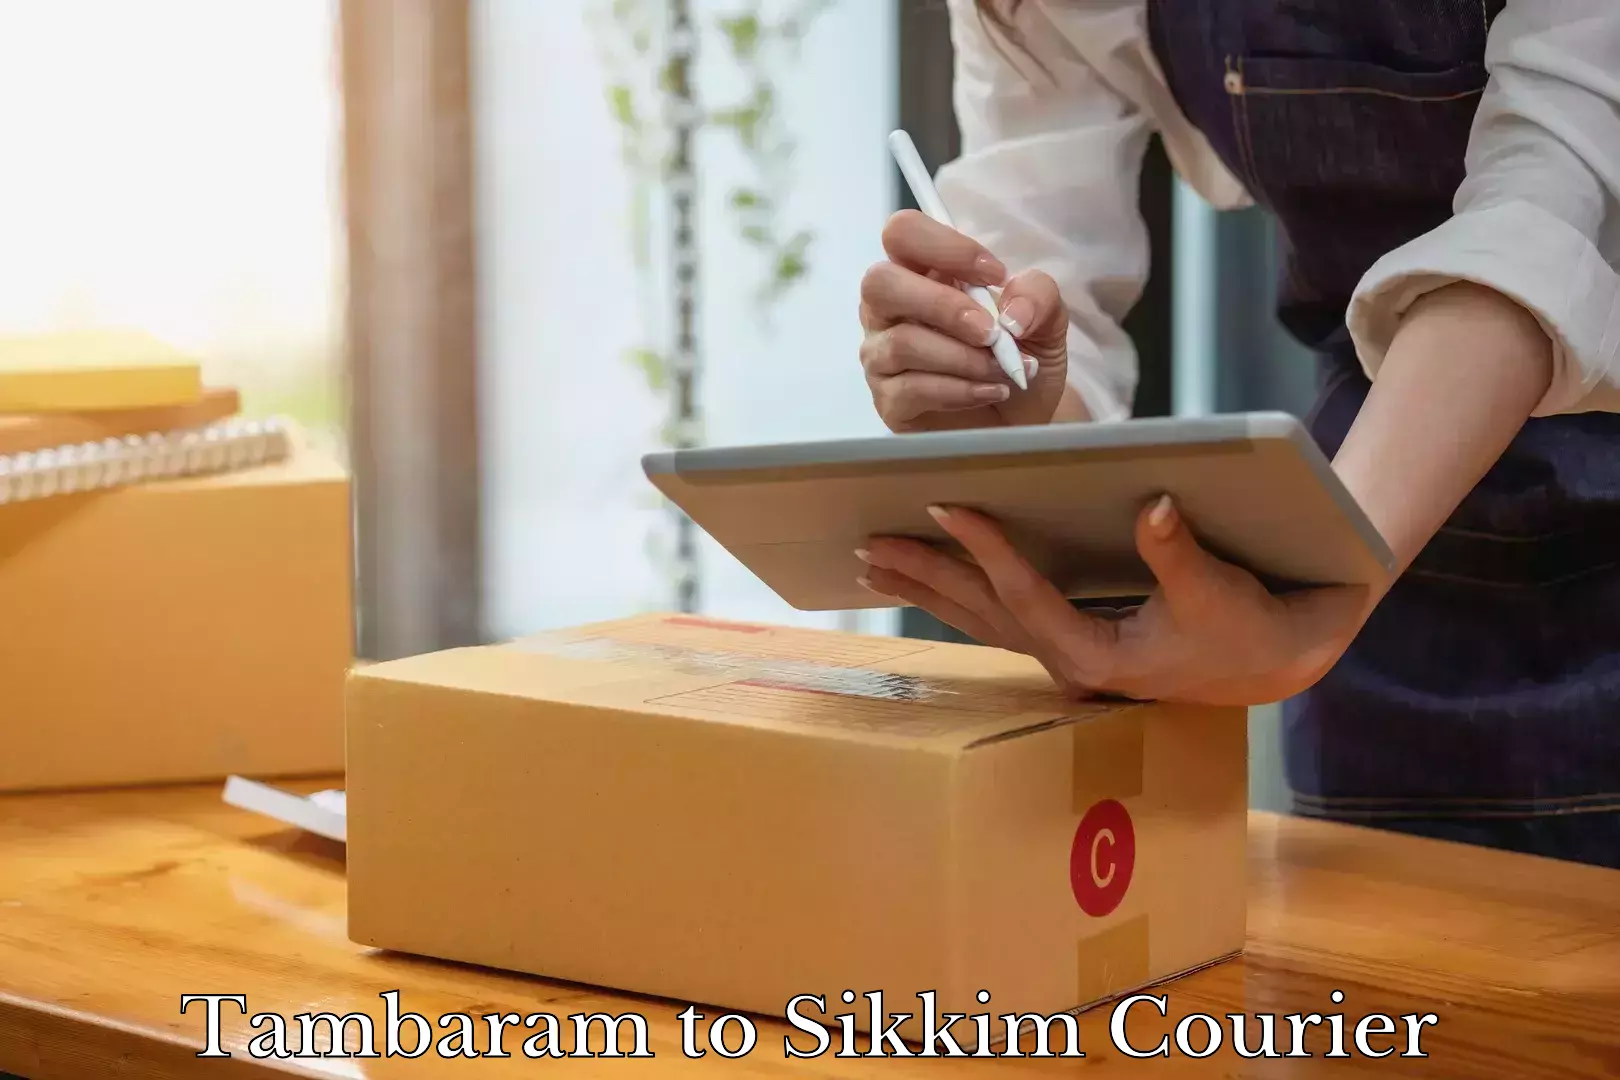 Luggage delivery app Tambaram to Sikkim